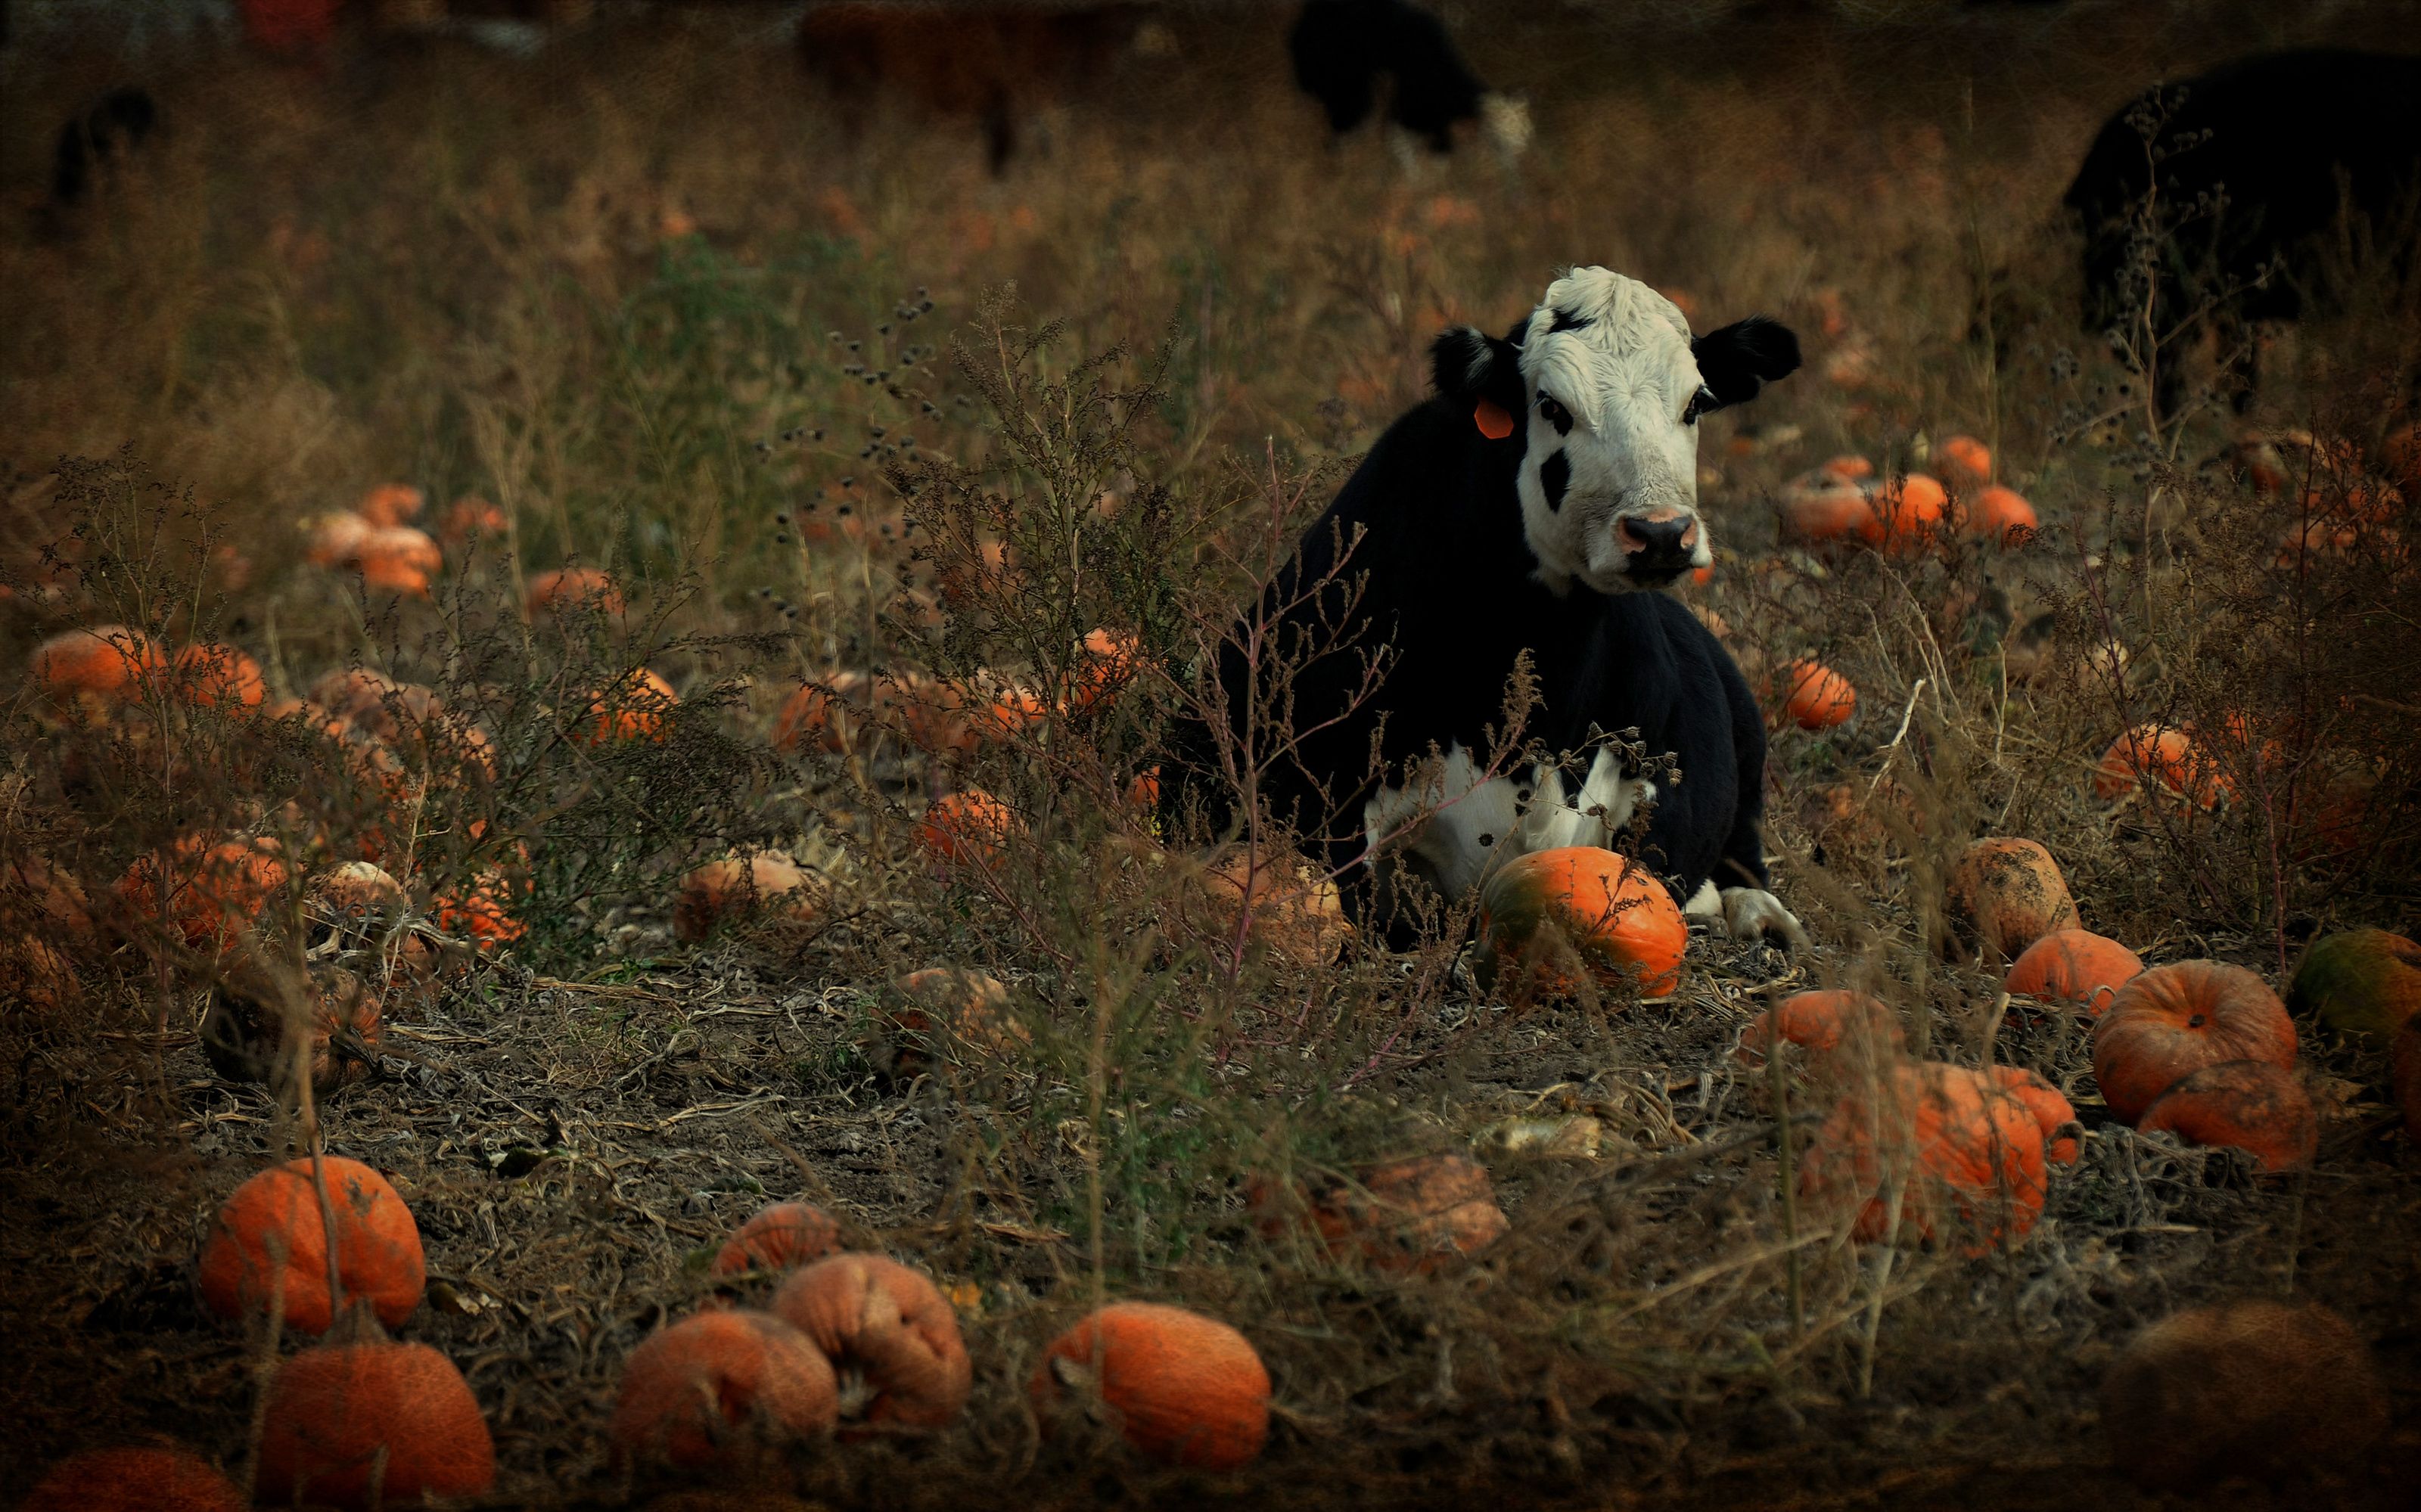 Cow in pumpkin patch by